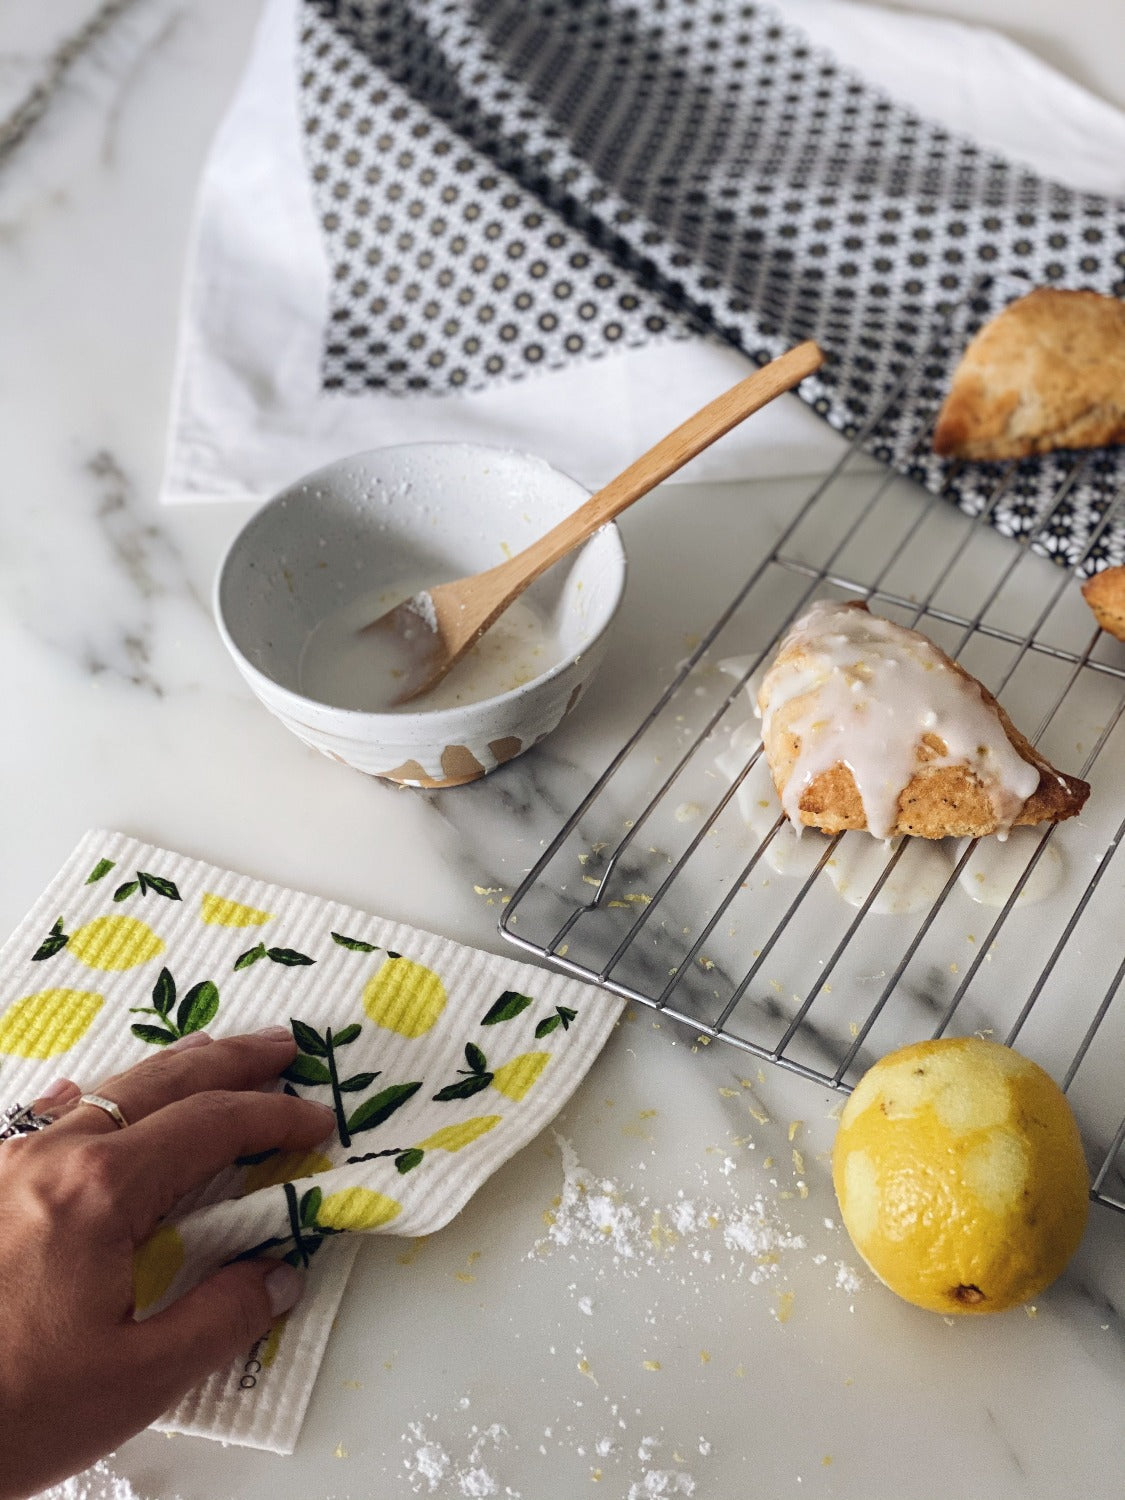 Product image of Citrus Lemon Gift set on a white marble surface. In this image there is a hand holding the sponge cloth wiping up some flour. There is a Starburst Blue tea towel at the top with a scone on it. Below that is a small bowl with icing in it and a wooden spoon. Beside the bowl is a wire rack that has a scone on it with icing dripping from it. There is a lemon that has been zested beside the wire rack. 